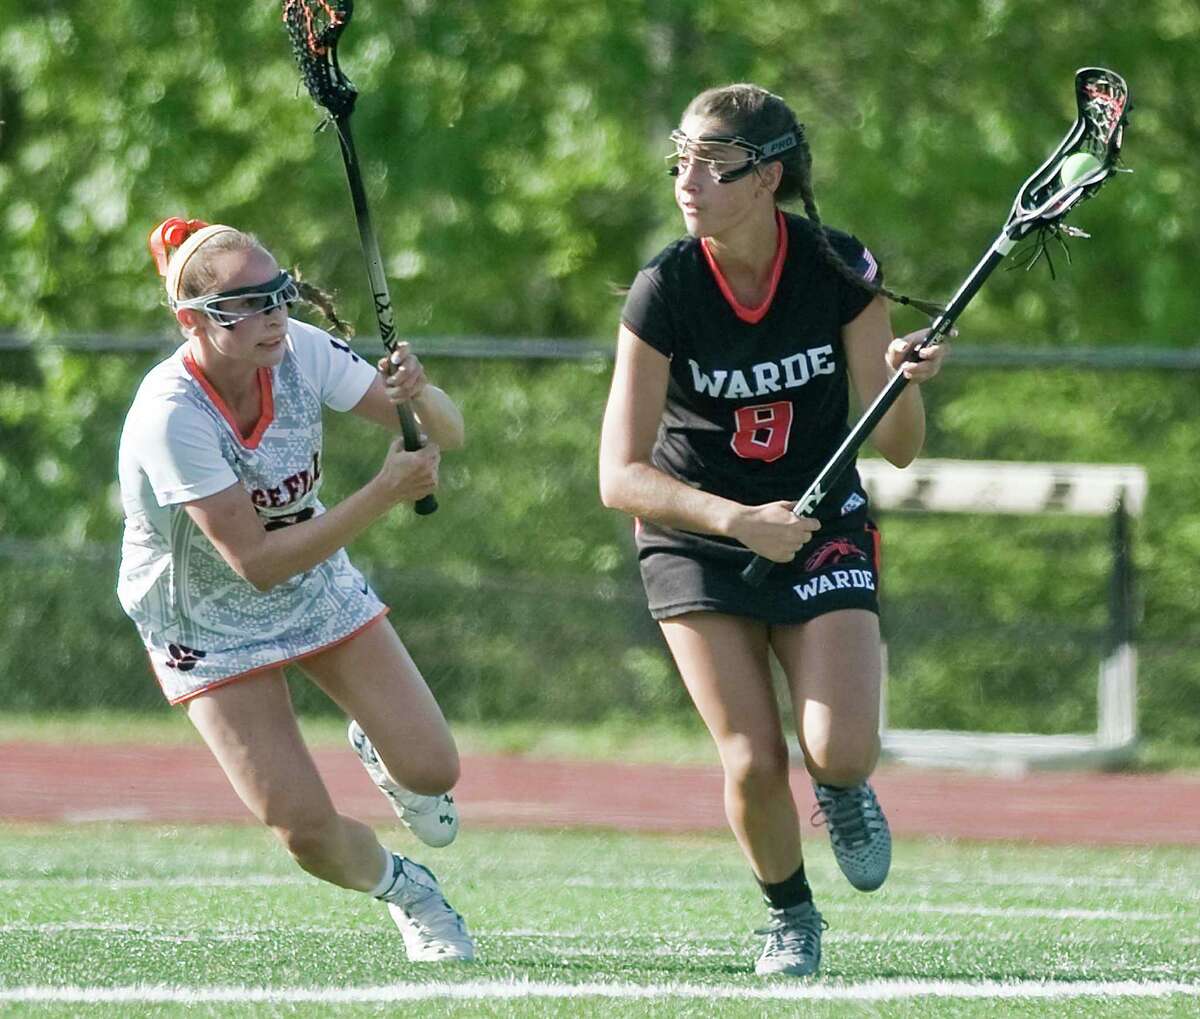 Ridgefield High School's Lucie Picard chases Fairfield Warde High School's Courtney Scheetz in a game played at Ridgefield. Friday, May 20, 2016